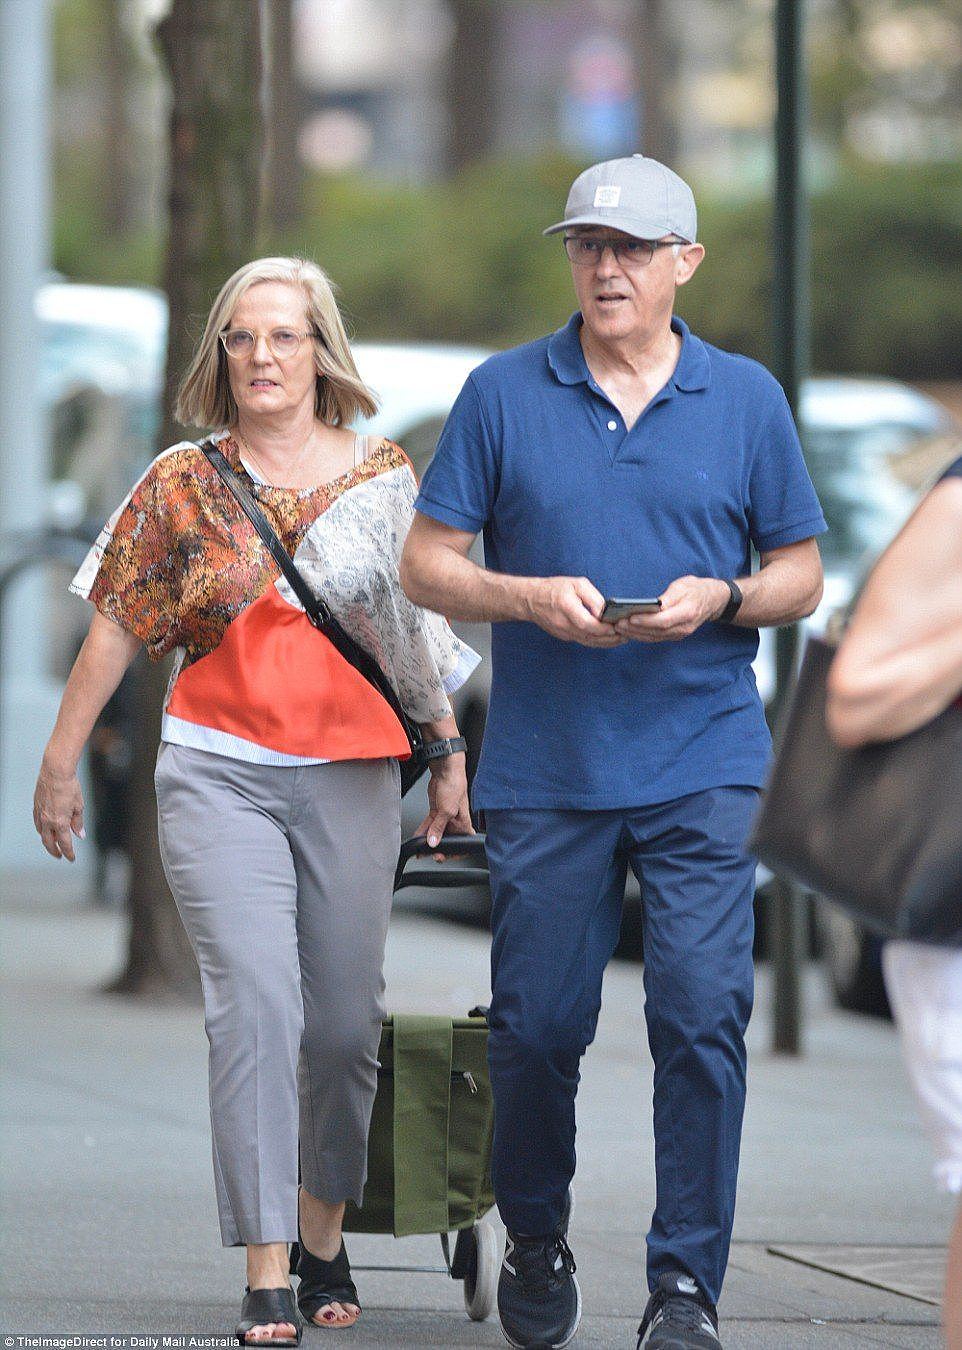 Multi-millionaire former prime minister Malcolm Turnbull and his wife Lucy have been spotted trundling a green trolley around New York City as the party he left behind is beset with claims of bullying, leaks and scandal